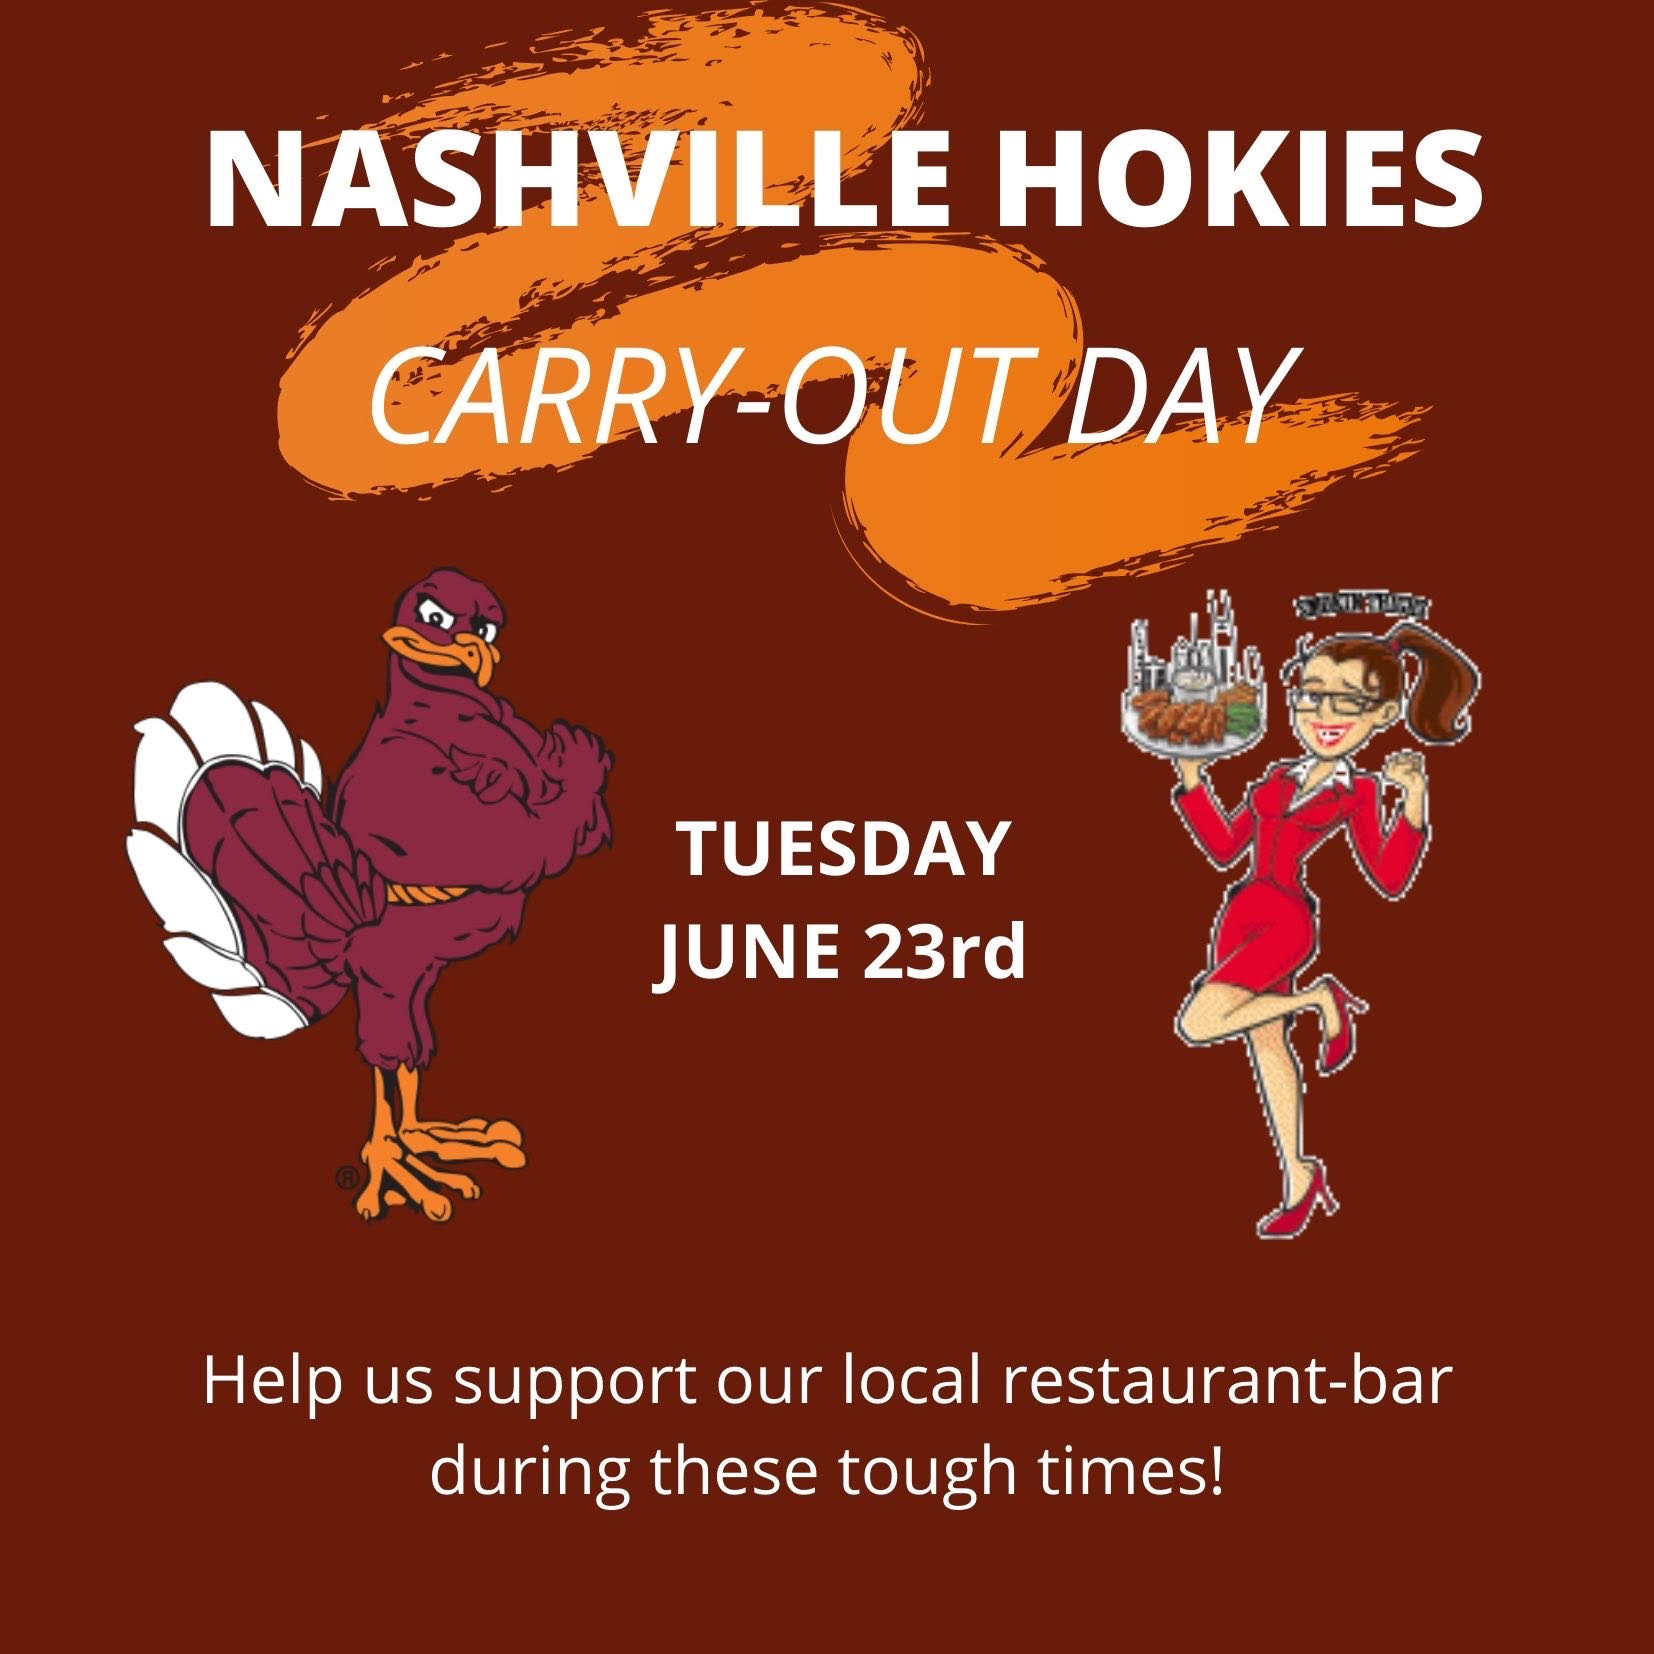 Nashville Hokies Carry-Out Day